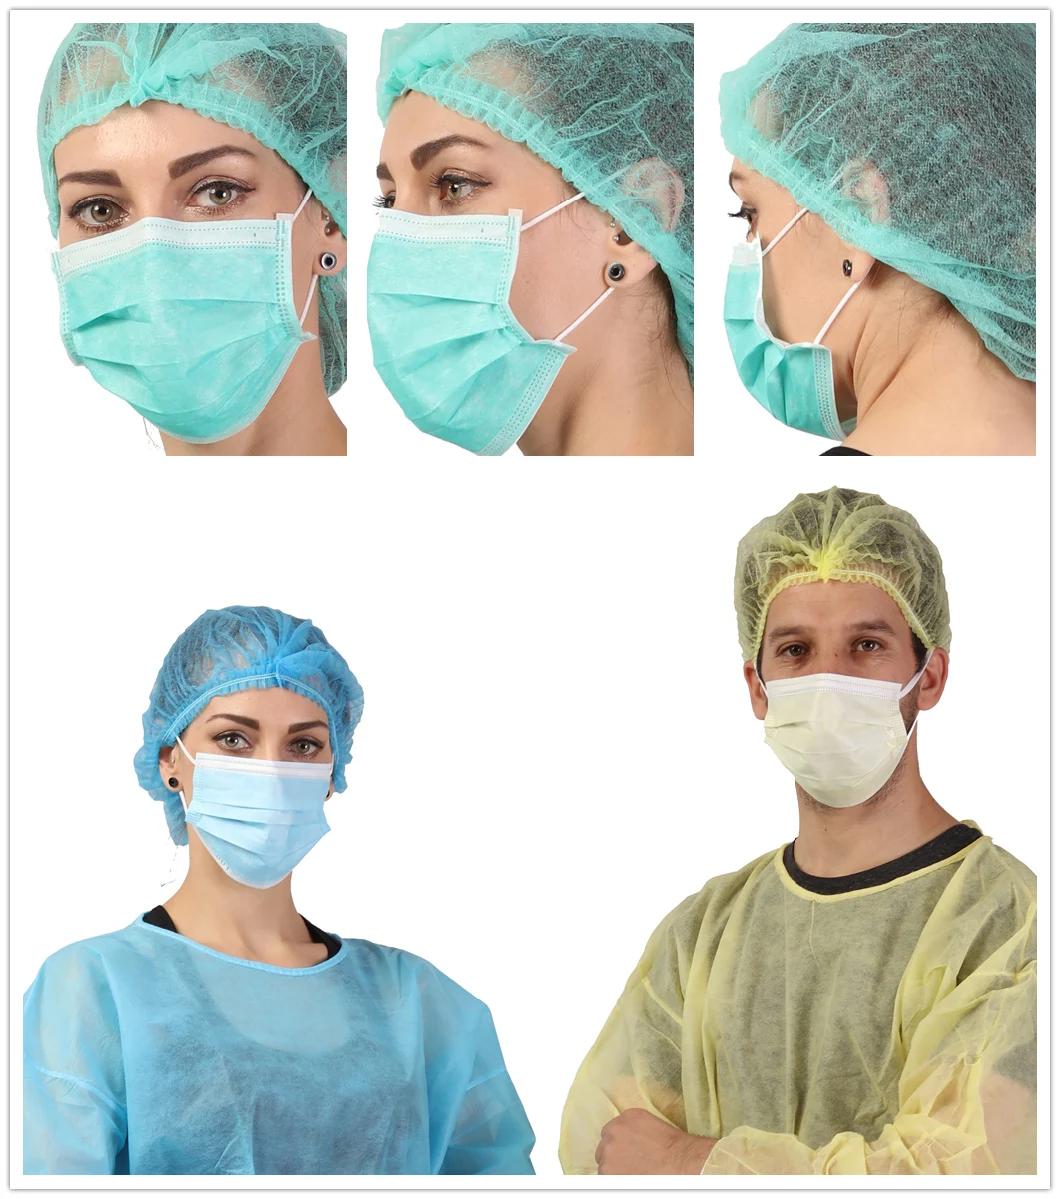 Filter Disposable 3ply Face Mask Disposable Medical Mask Fast Shipping Medical Face Mask